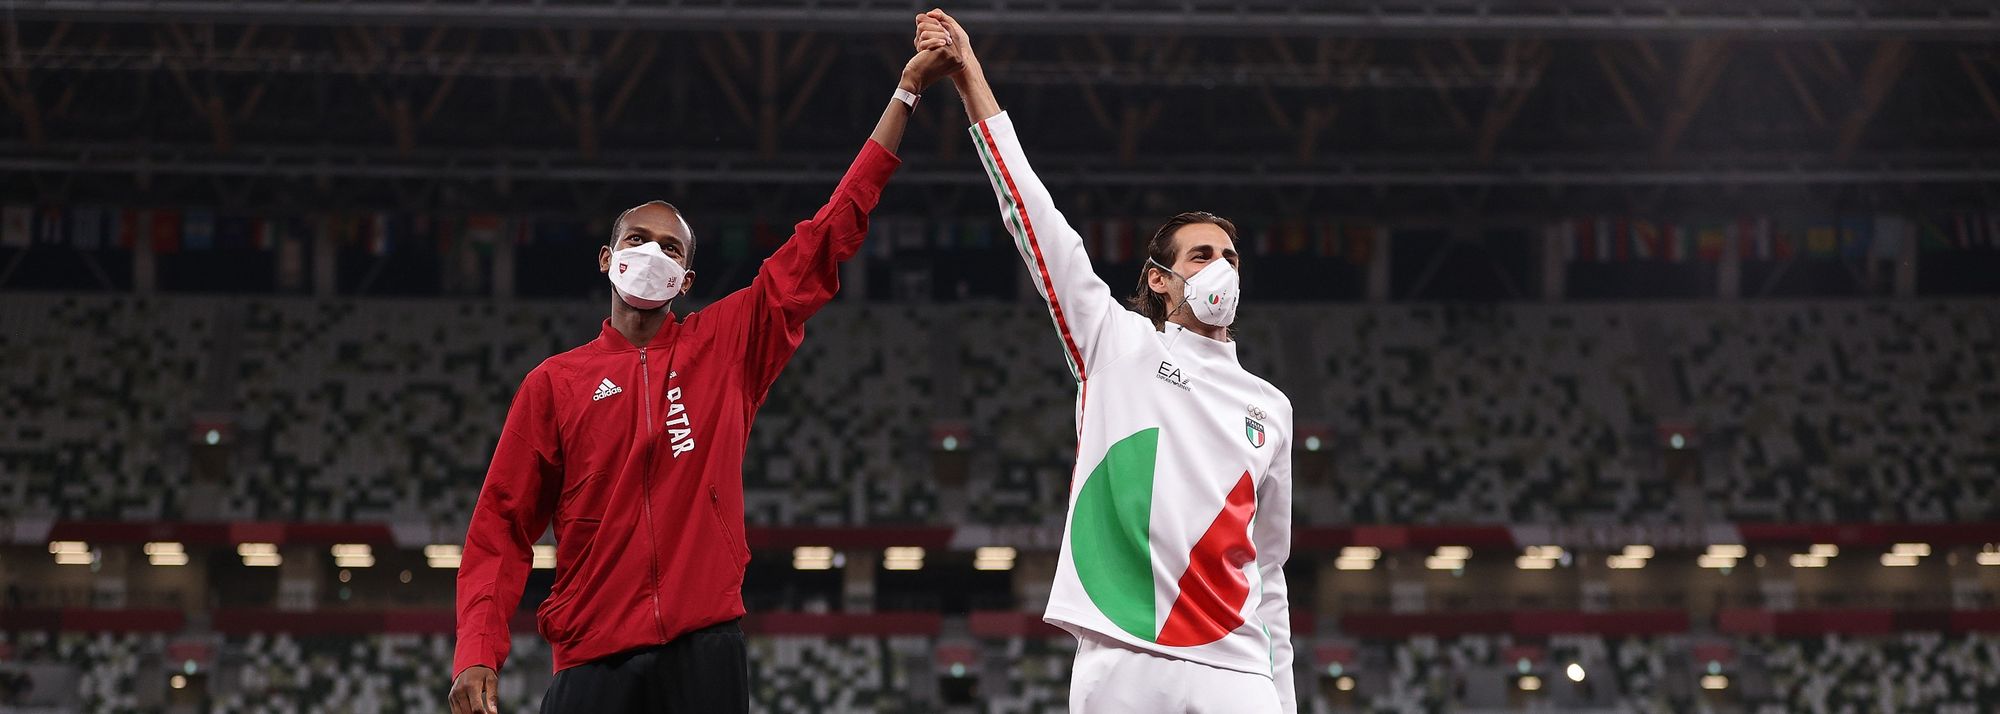 Athletics is rarely more poetic than it was in Tokyo on Sunday night, when Mutaz Barshim and Gianmarco Tamberi agreed to share the Olympic high jump gold medal.